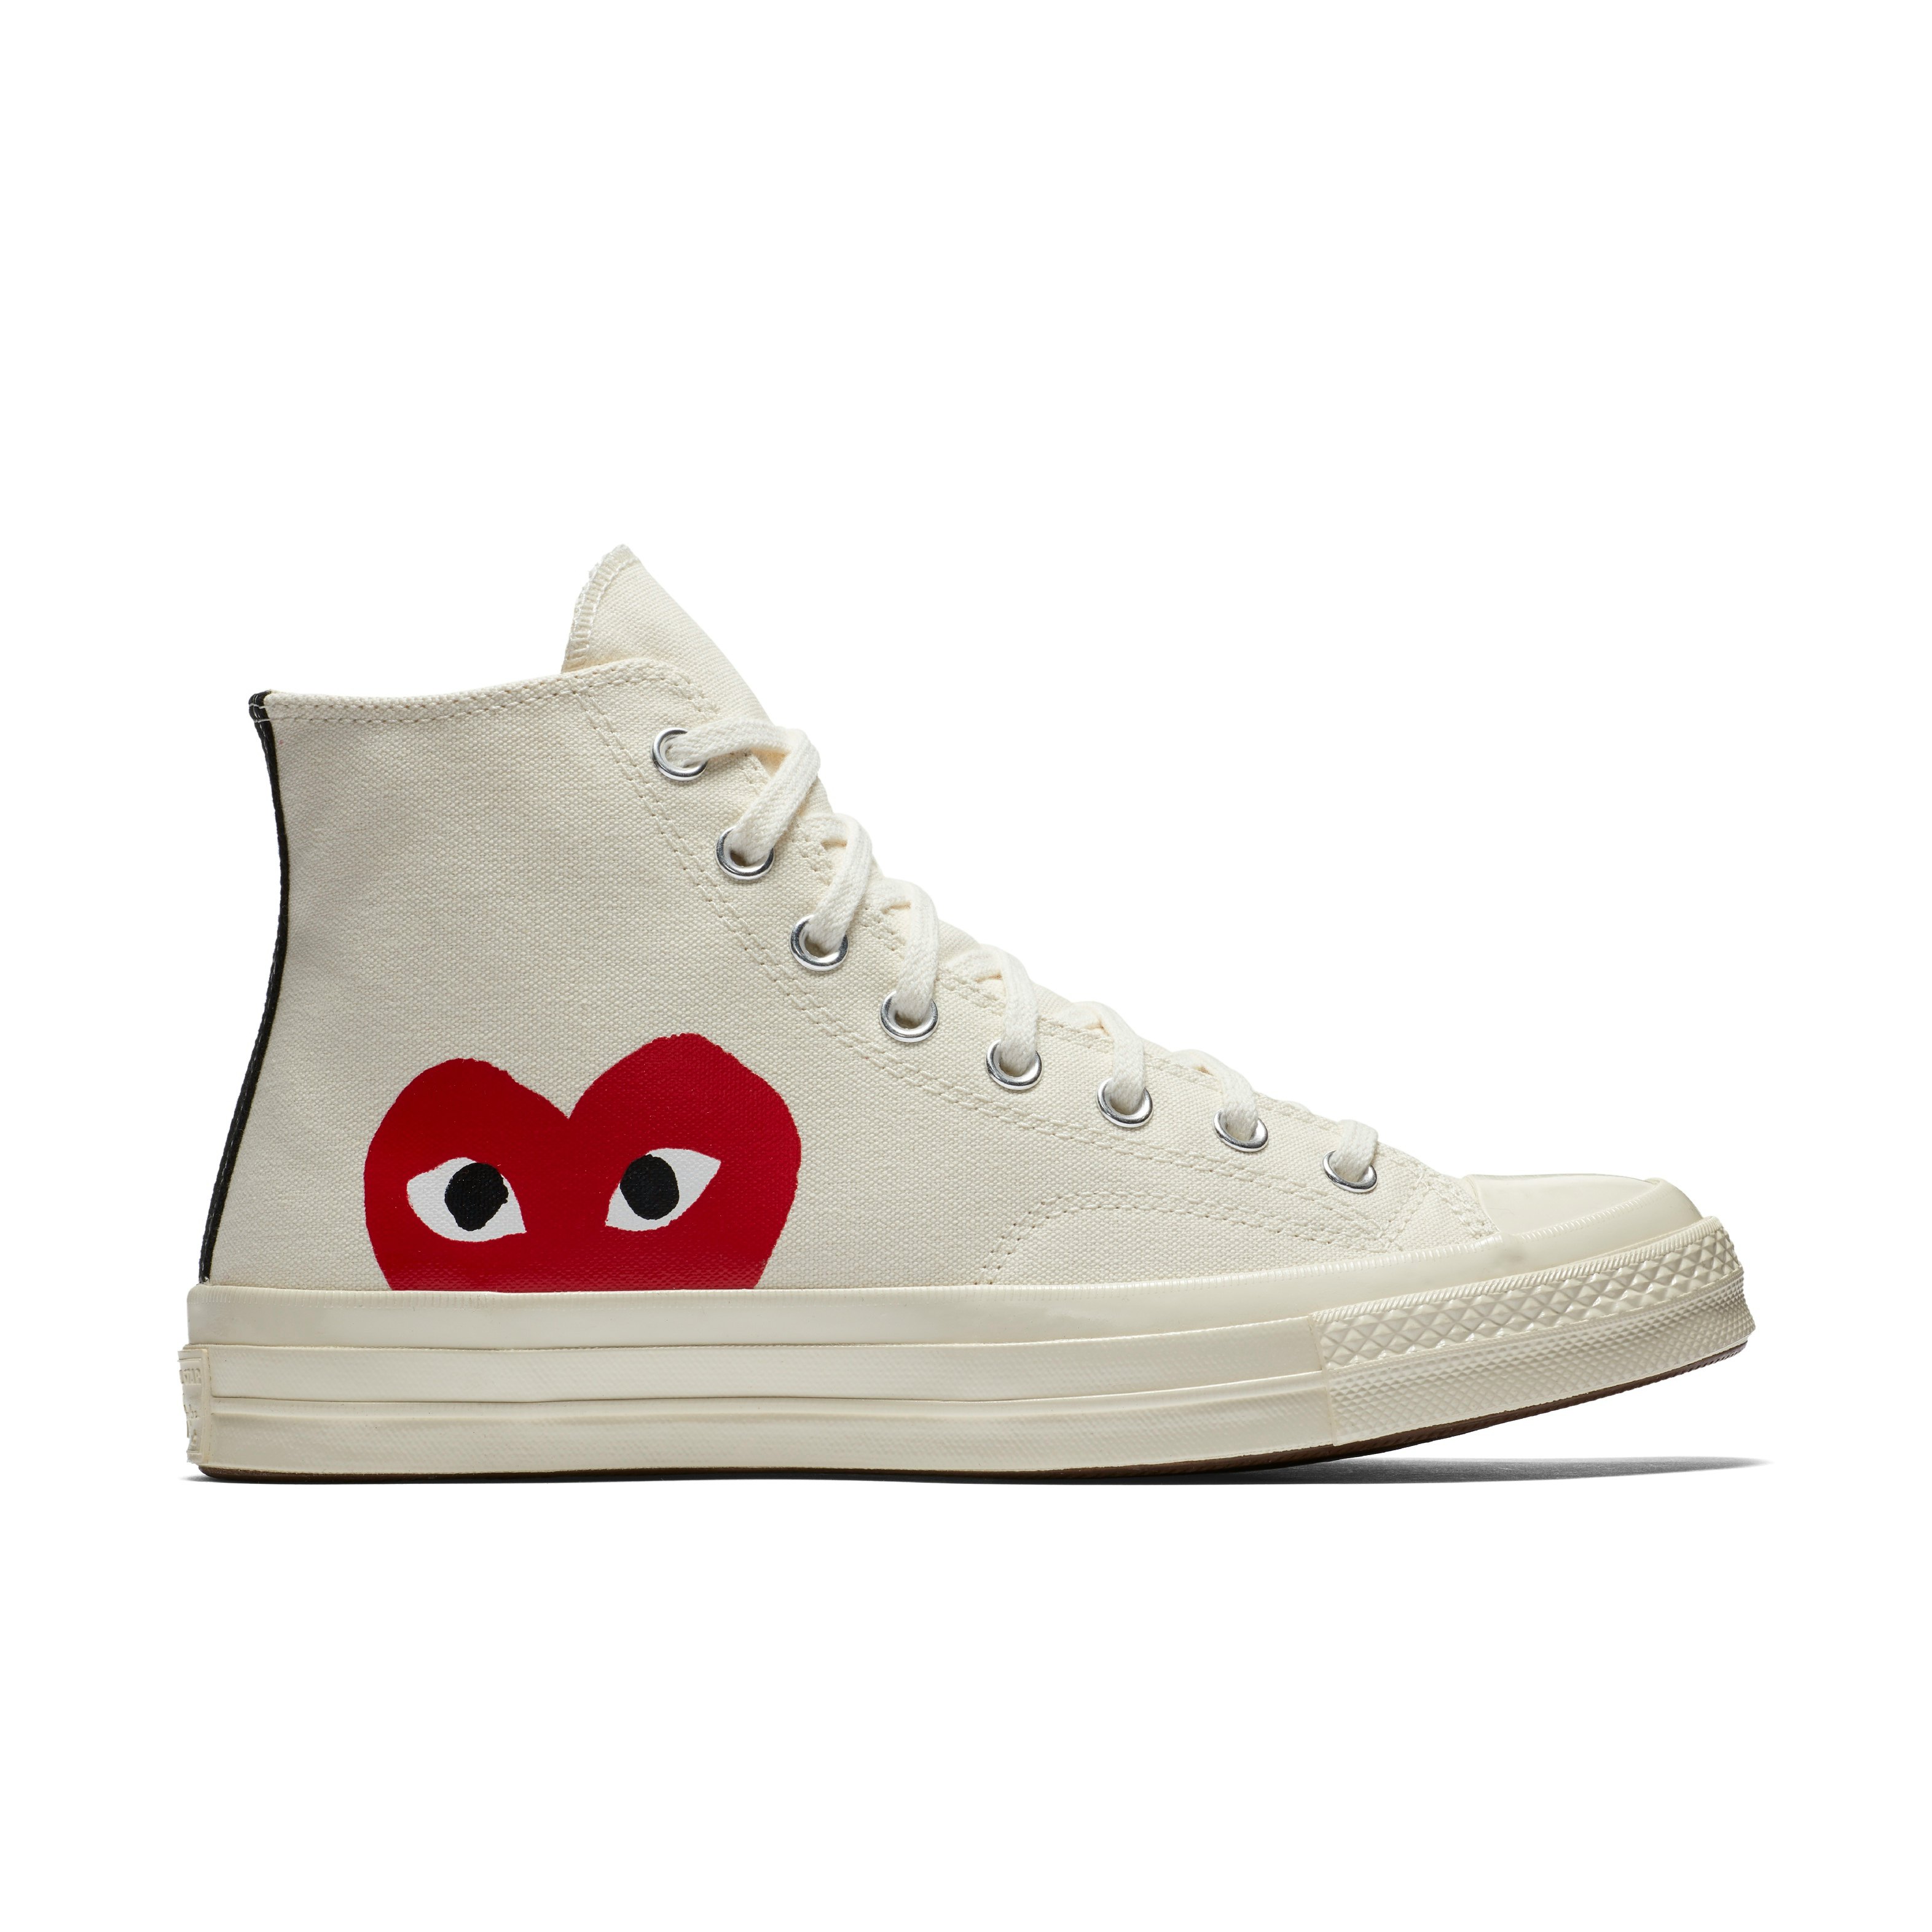 converse chuck taylor all star 2v leather and thermal low top